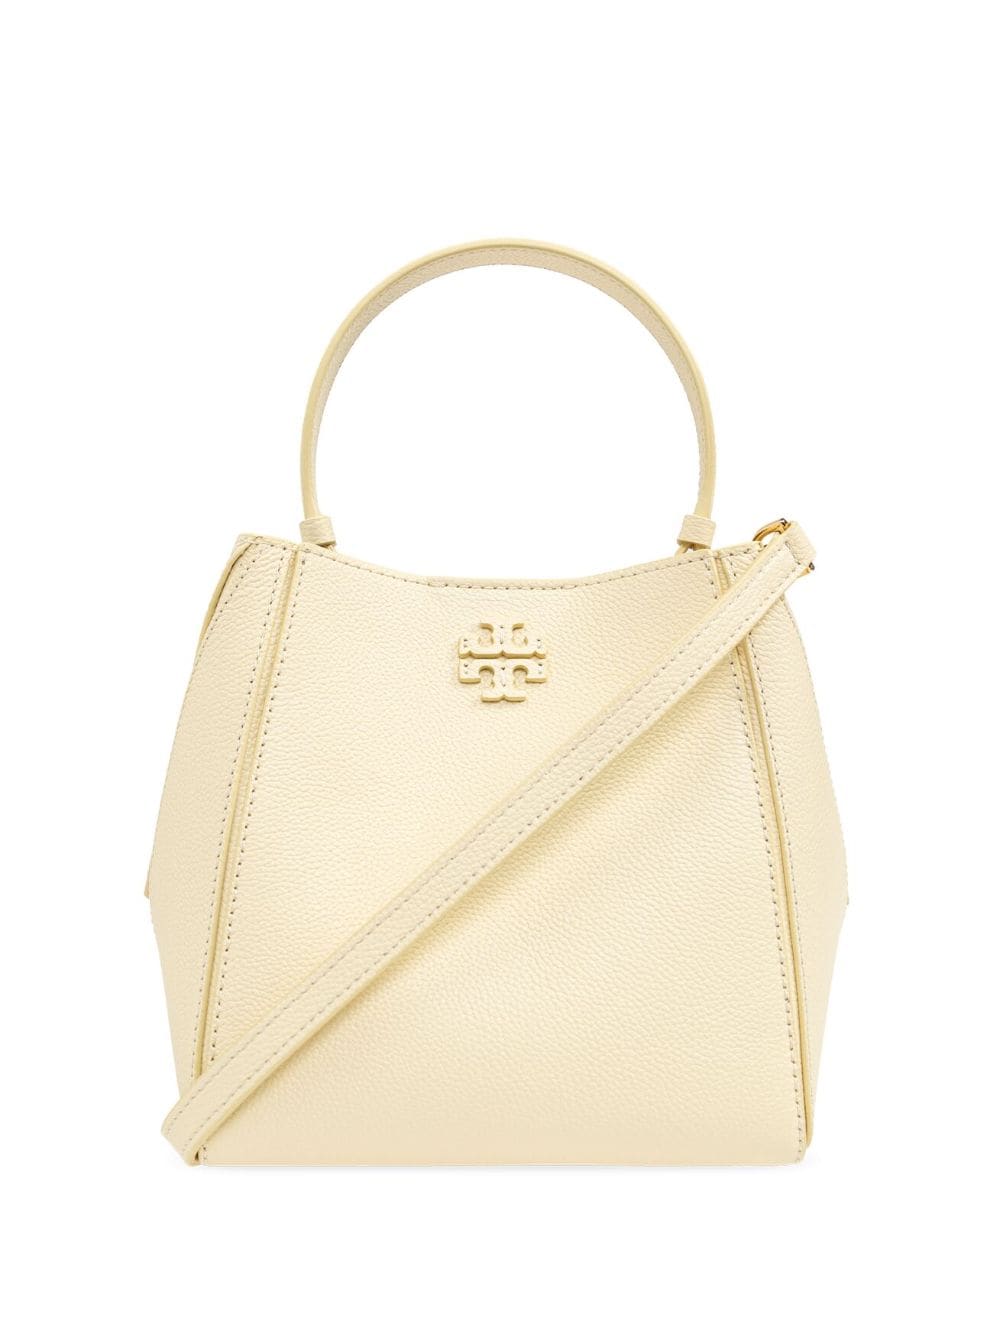 Tory Burch Mcgraw Leather Bucket Bag In Yellow